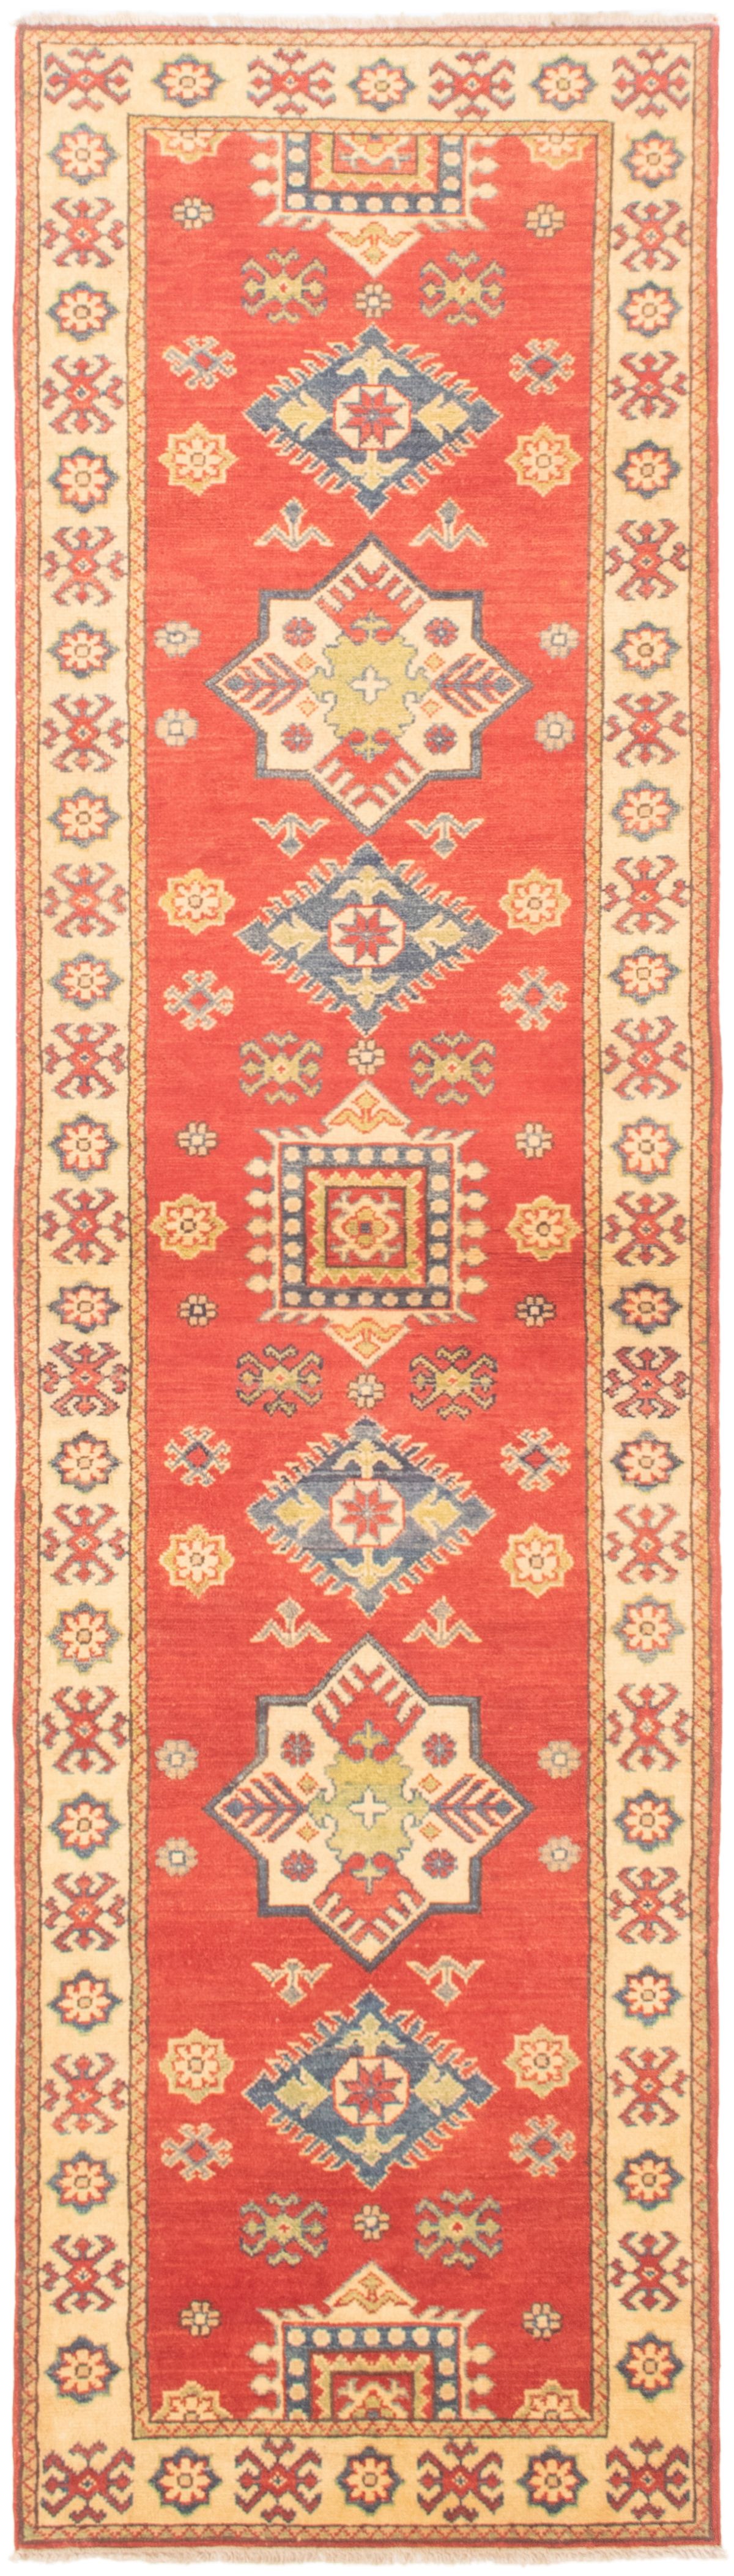 Hand-knotted Finest Gazni Red Wool Rug 2'6" x 9'4"  Size: 2'6" x 9'4"  